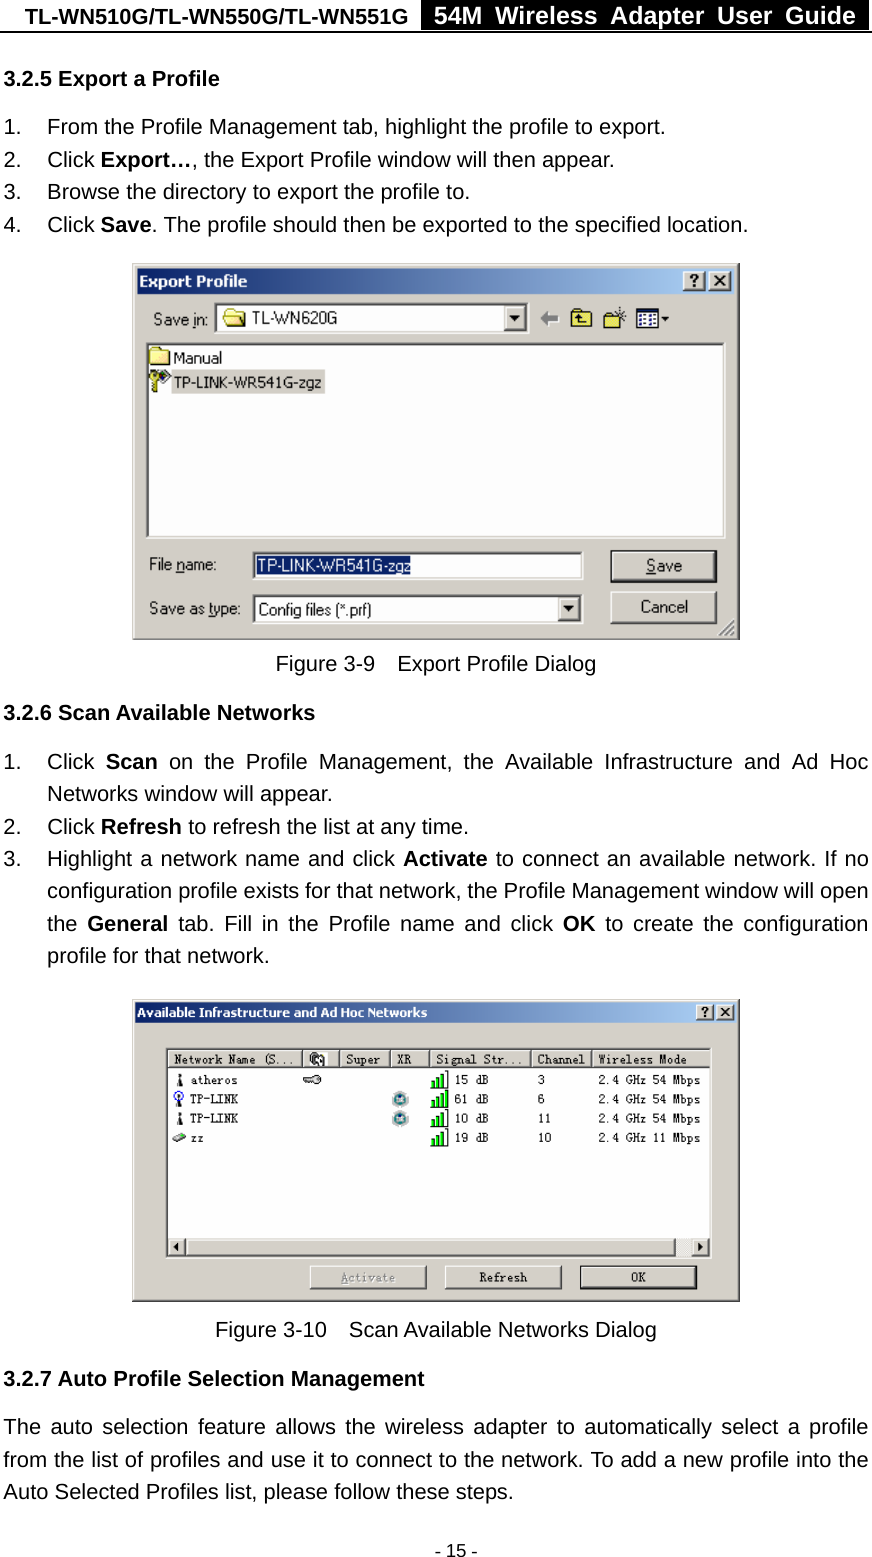 TL-WN510G/TL-WN550G/TL-WN551G  54M Wireless Adapter User Guide   - 15 -3.2.5 Export a Profile 1.  From the Profile Management tab, highlight the profile to export. 2. Click Export…, the Export Profile window will then appear. 3.  Browse the directory to export the profile to. 4. Click Save. The profile should then be exported to the specified location.  Figure 3-9    Export Profile Dialog 3.2.6 Scan Available Networks 1. Click Scan on the Profile Management, the Available Infrastructure and Ad Hoc Networks window will appear. 2. Click Refresh to refresh the list at any time. 3.  Highlight a network name and click Activate to connect an available network. If no configuration profile exists for that network, the Profile Management window will open the  General tab. Fill in the Profile name and click OK to create the configuration profile for that network.  Figure 3-10    Scan Available Networks Dialog 3.2.7 Auto Profile Selection Management The auto selection feature allows the wireless adapter to automatically select a profile from the list of profiles and use it to connect to the network. To add a new profile into the Auto Selected Profiles list, please follow these steps. 